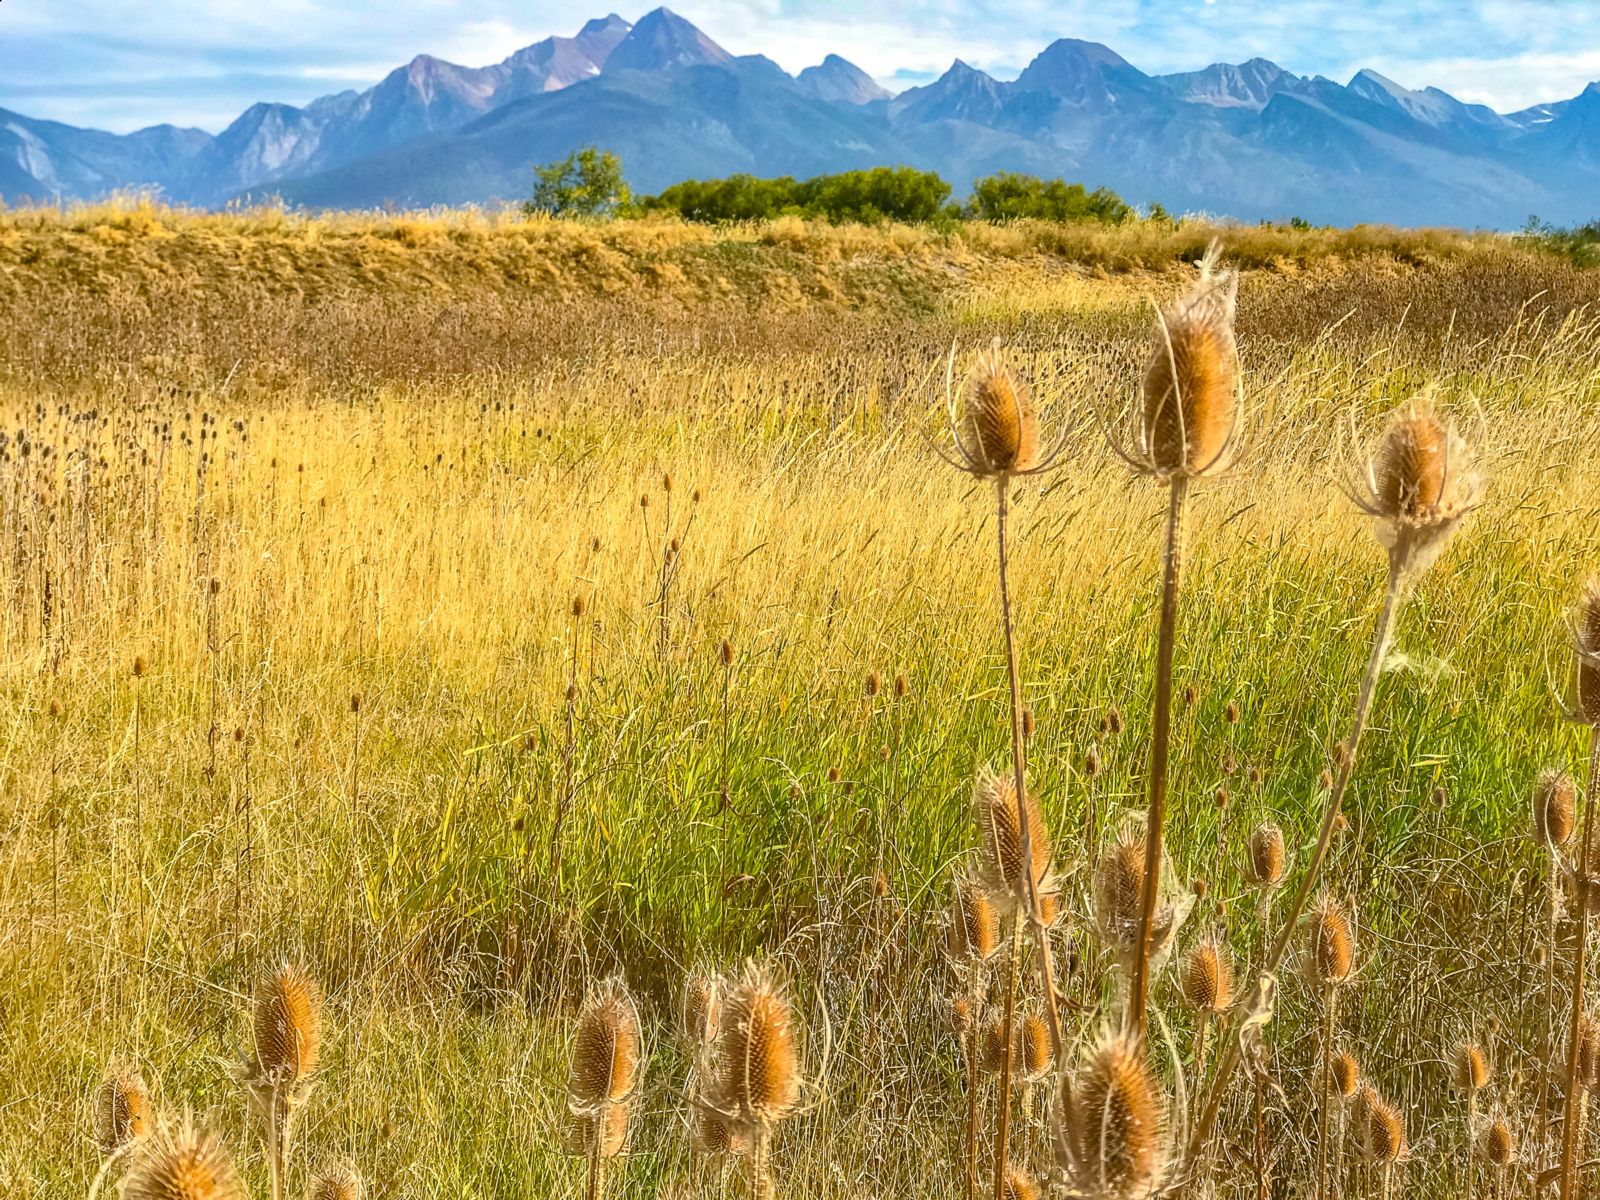 The Mission Mountains provide the backdrop at Ninepipe National Wildlife Refuge. Photo © Carter G. Walker.